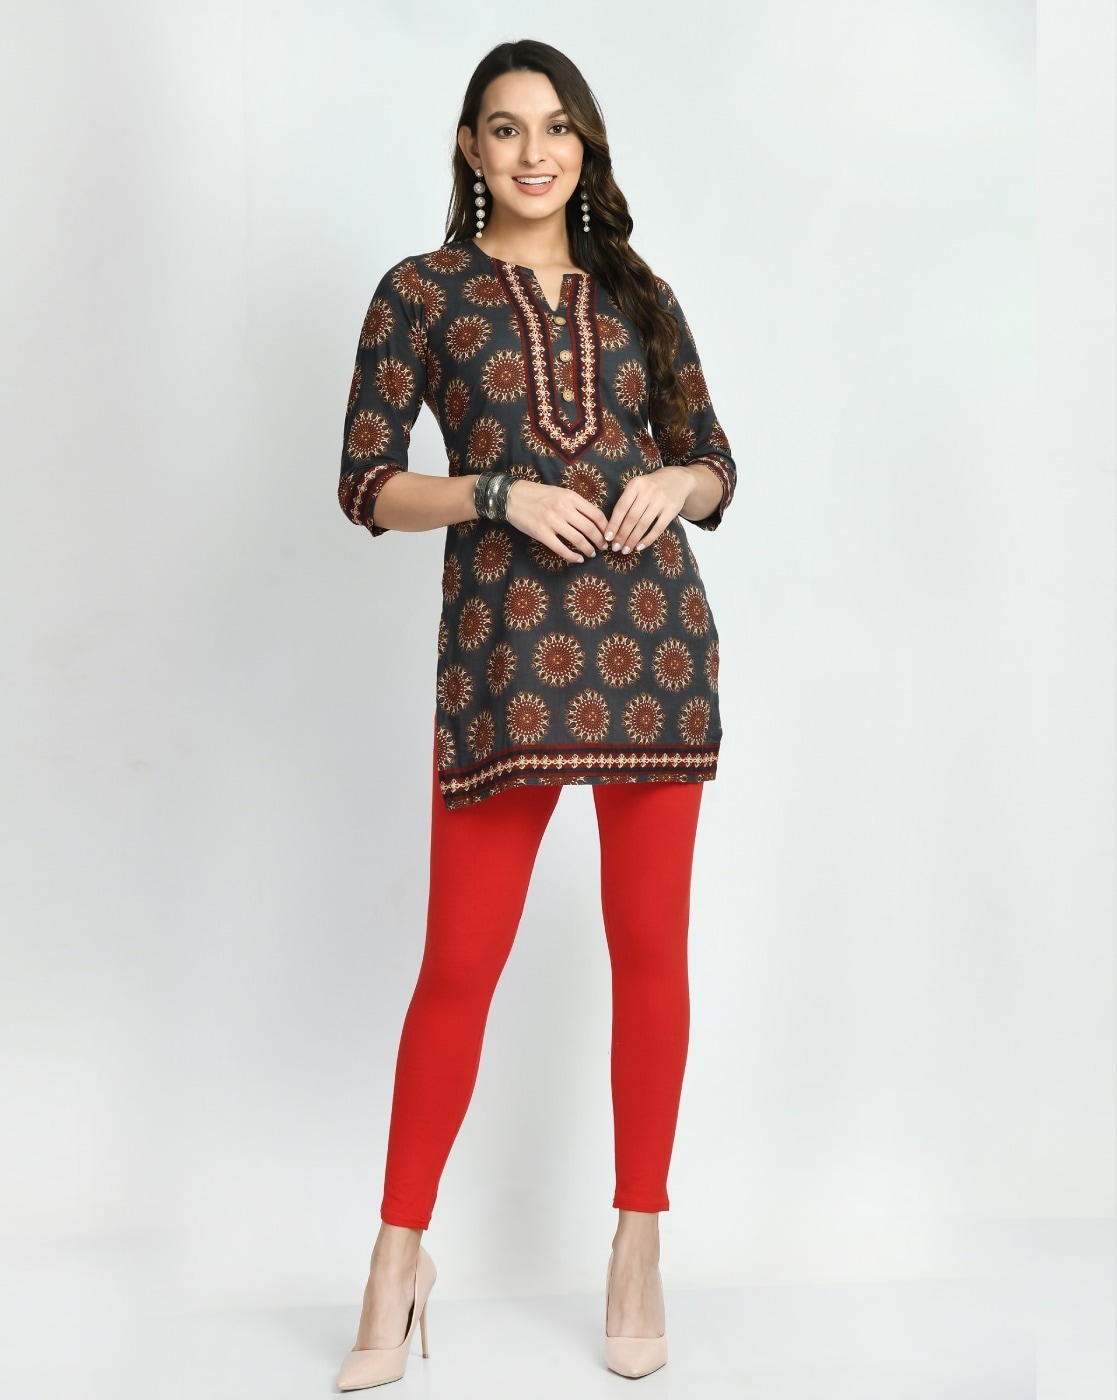 HSD tunic tops for leggings kurtis for women Indian designer Rayon Kurta  Tunic Top (Charcoal grey and red, S 36) at Amazon Women's Clothing store